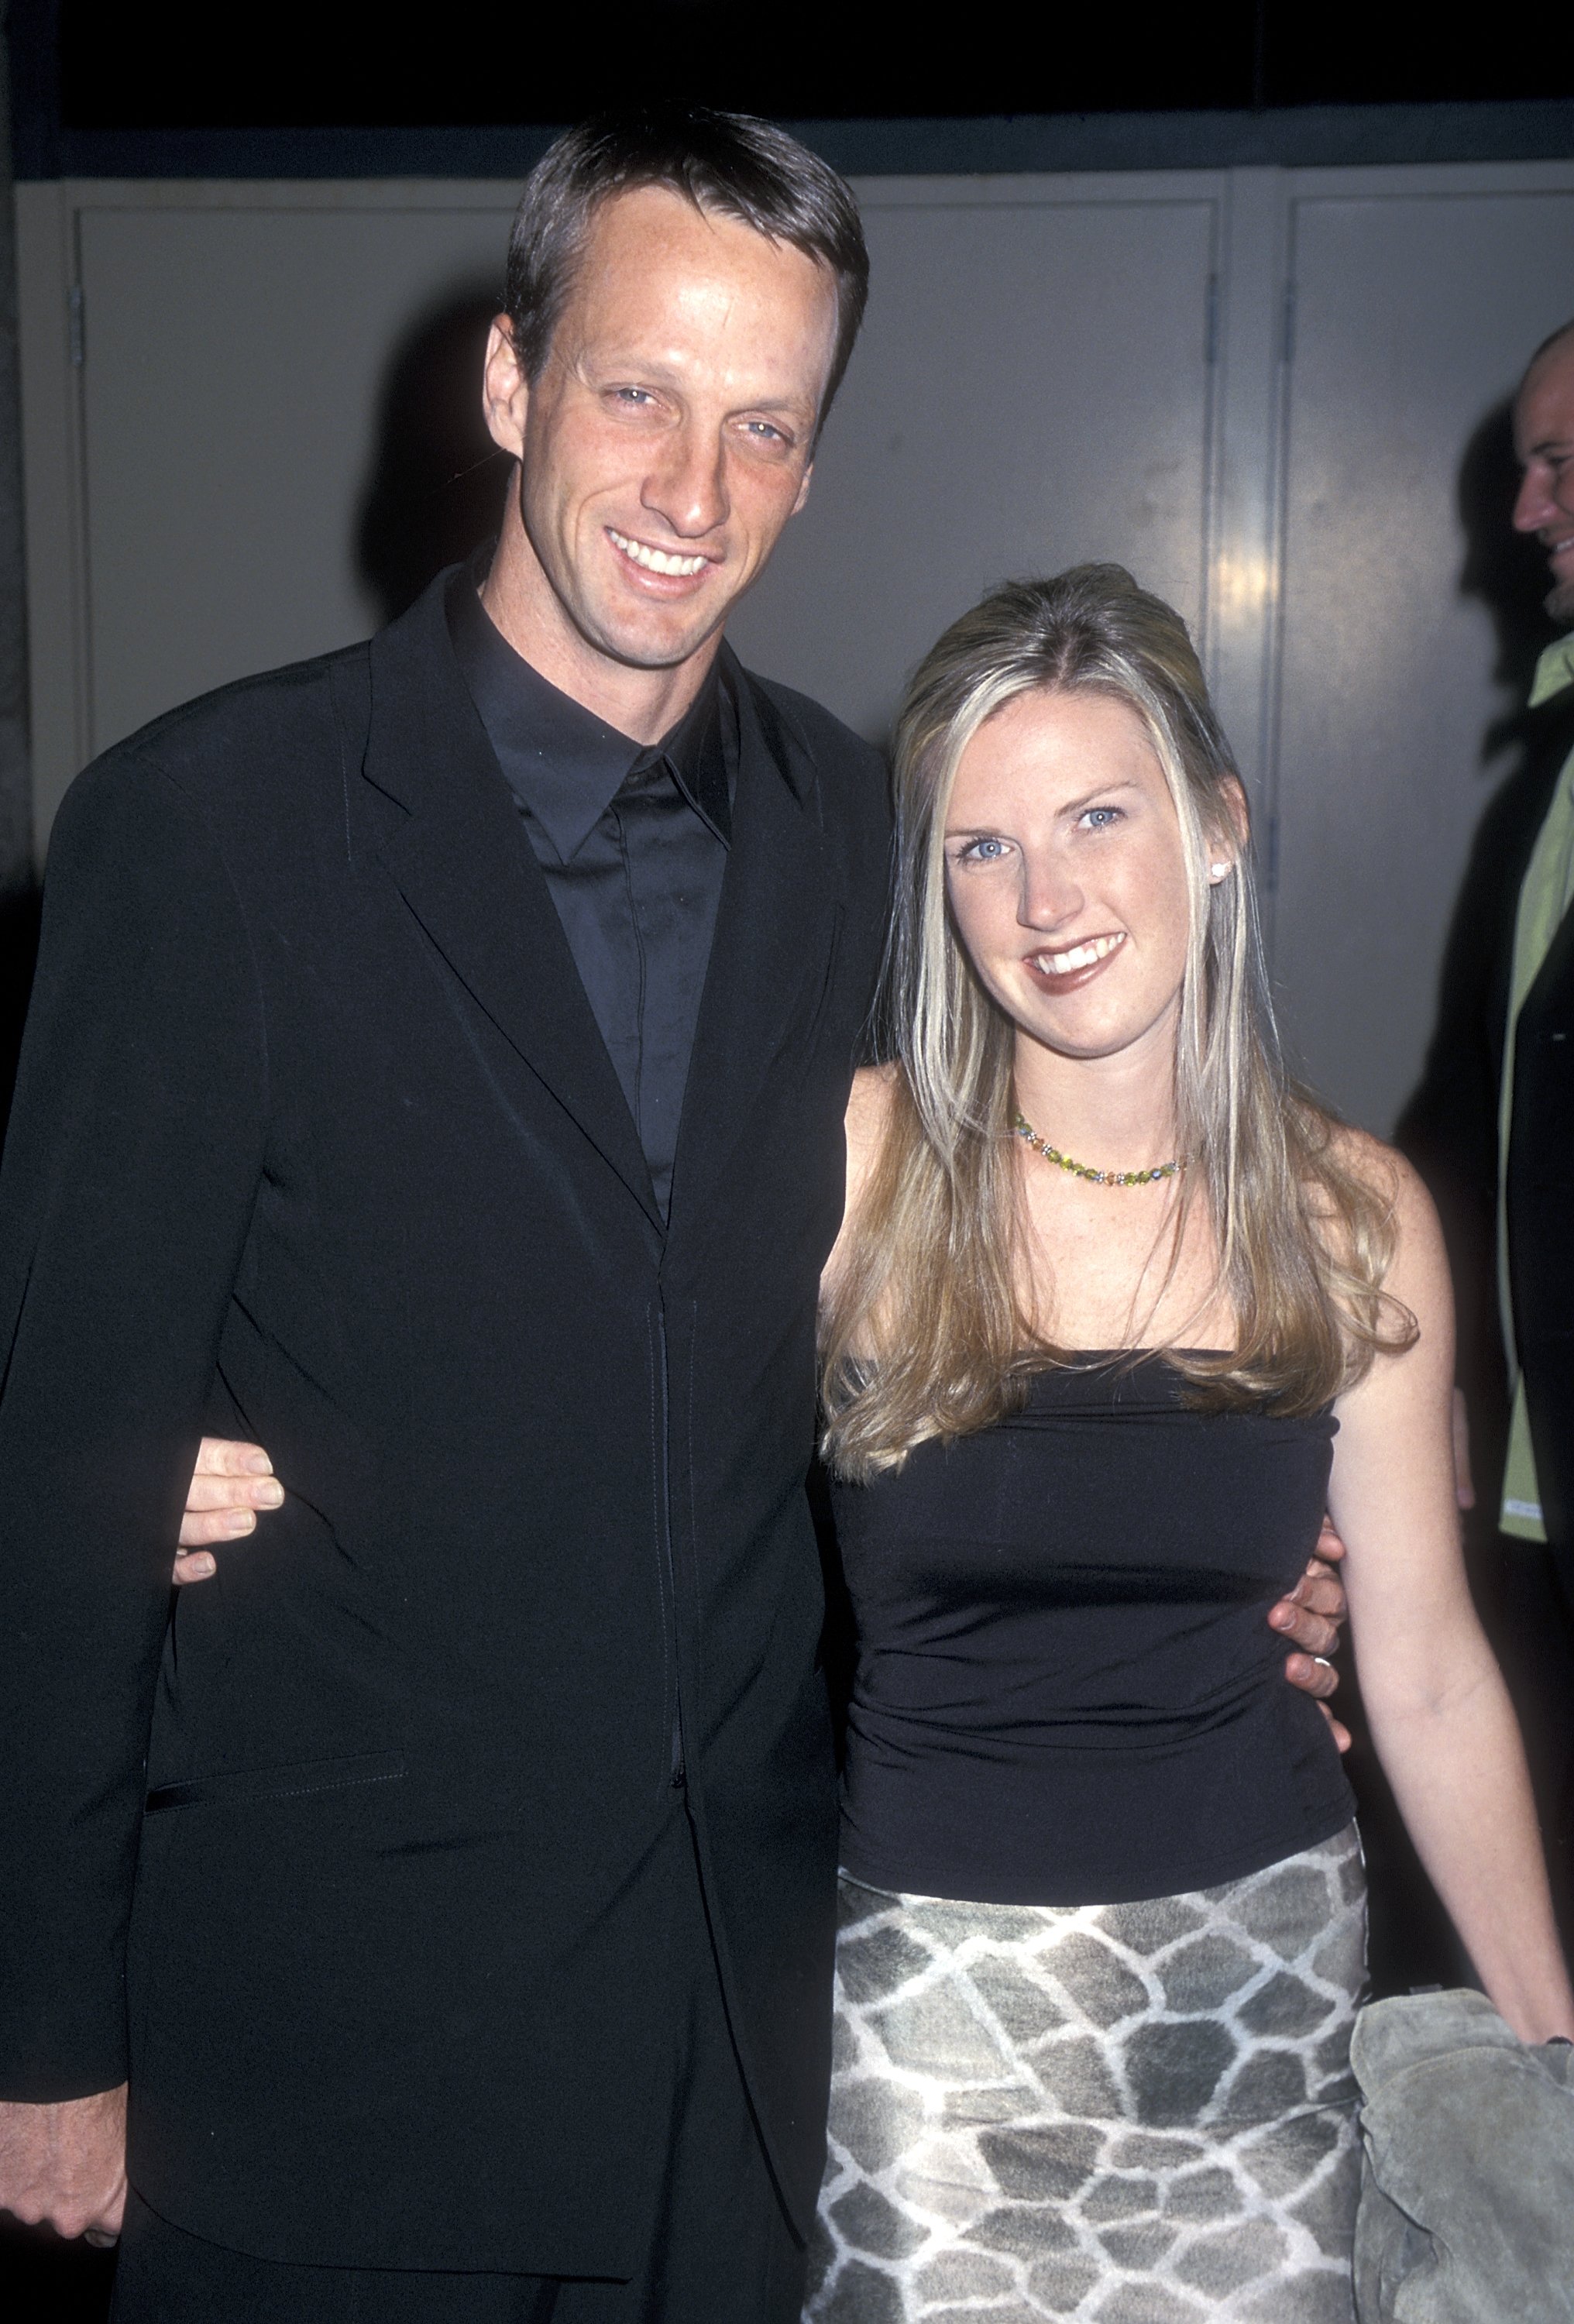 Tony Hawk and Erin Lee attend the 11th Annual Billboard Music Awards on December 5, 2000, at the MGM Grand Garden Arena in Las Vegas, Nevada. | Source: Getty Images